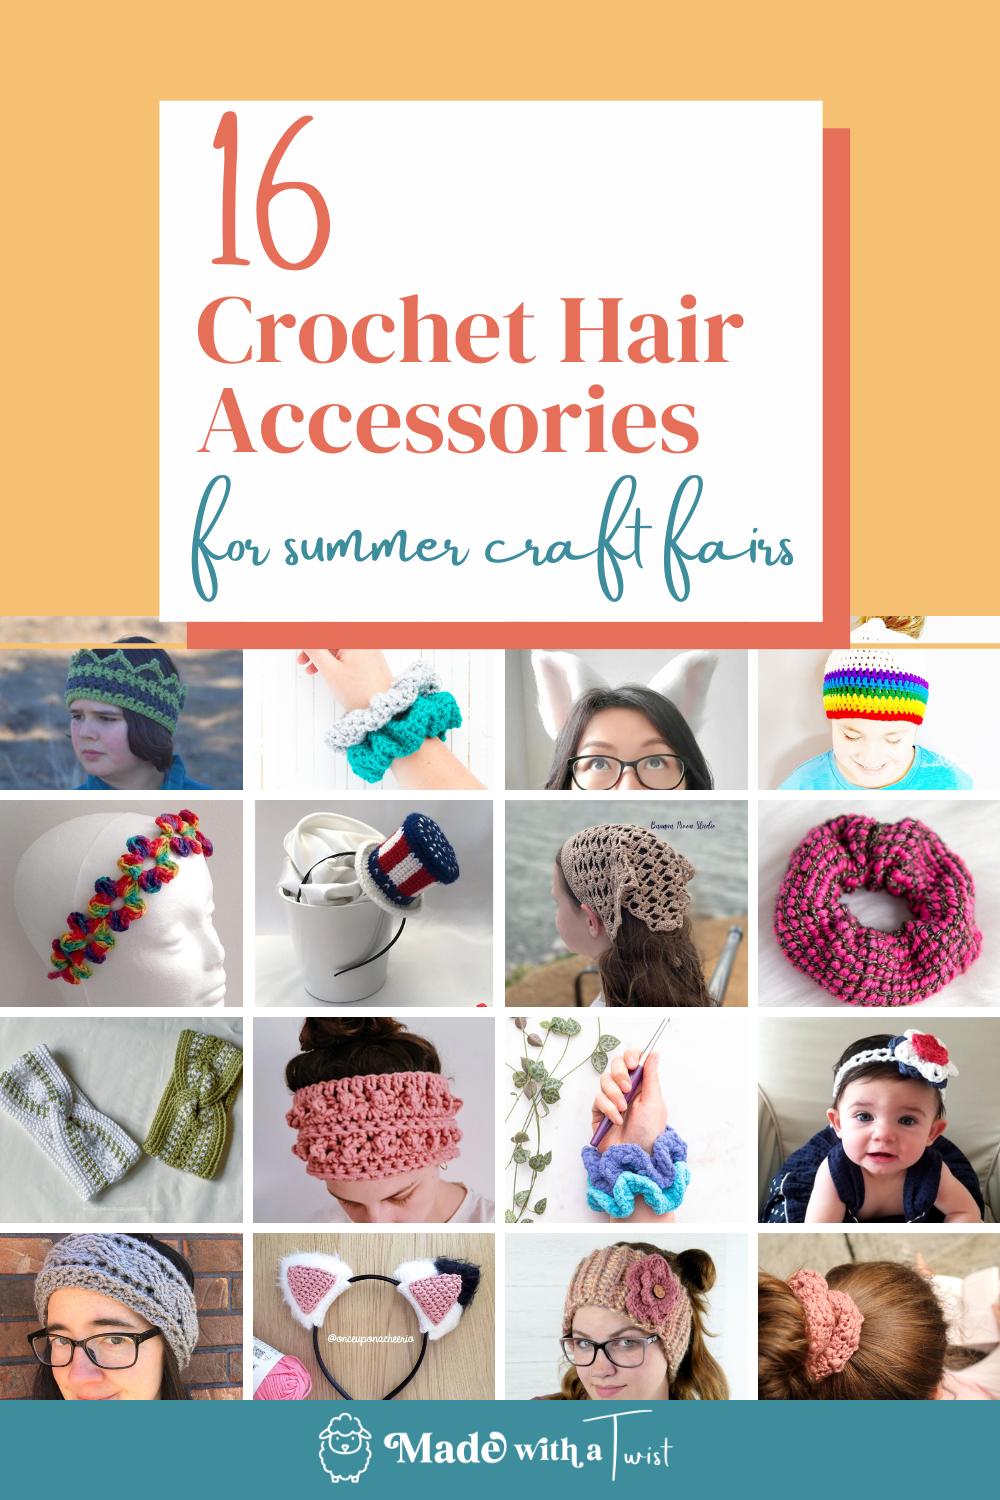 16 Crochet Hair Accessories to Keep You Cool this Summer!